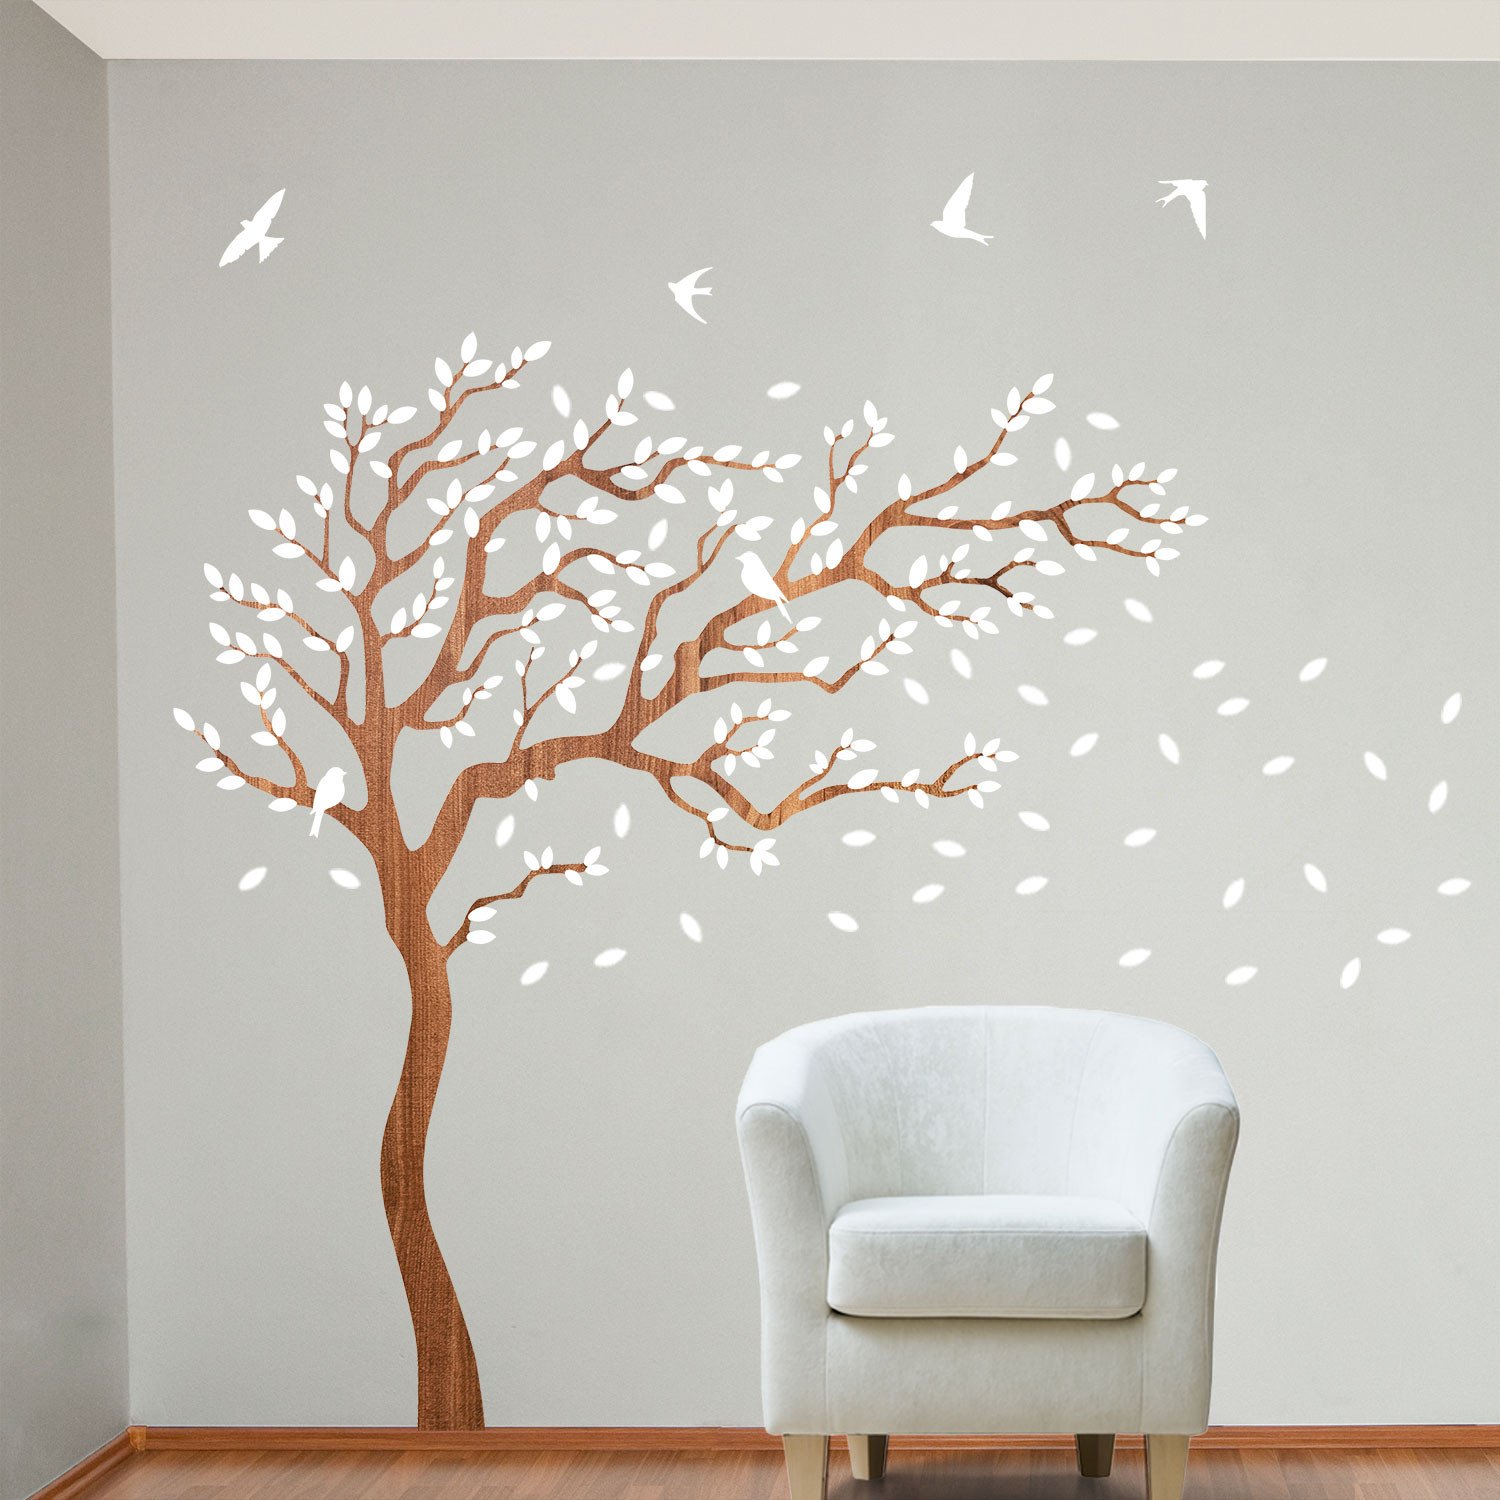 tree wall stickers breezy tree wall decal and bird stickers in white and wood FGCPMEO